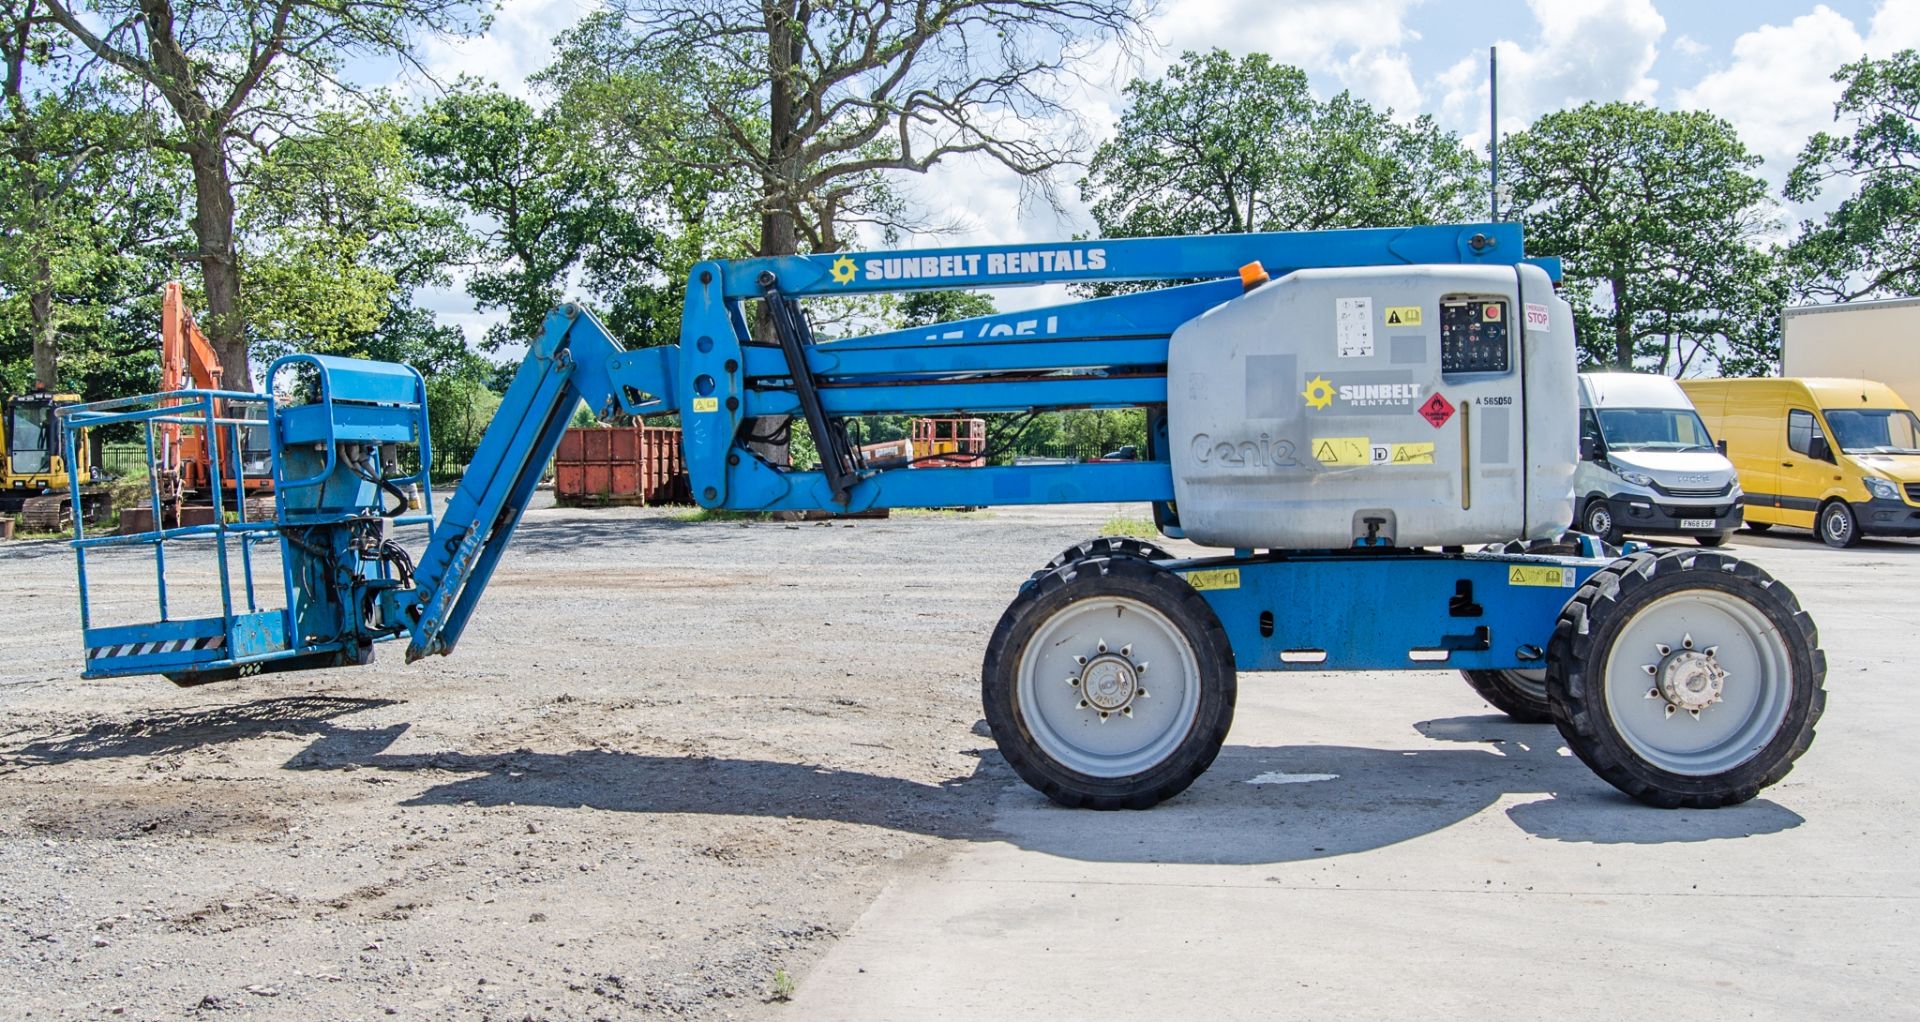 Genie Z-45/25 battery electric/diesel 4WD articulated boom lift Year: 2011 S/N: Z452512B-2013 - Image 7 of 18